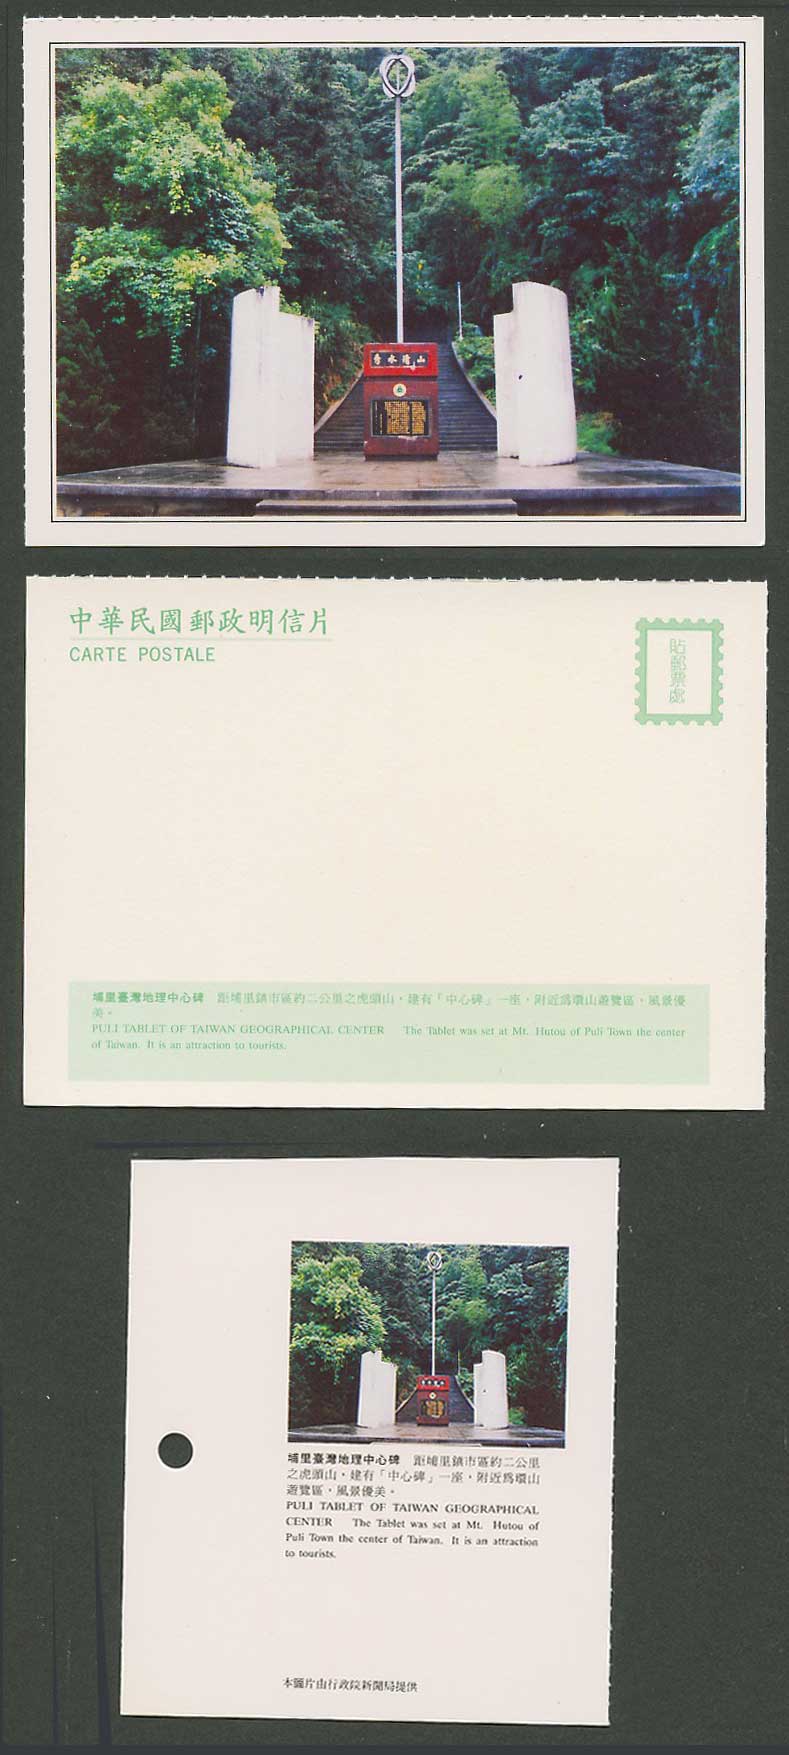 Taiwan Formosa China Postcard Puli Tablet of Taiwan Geographical Centre埔里臺灣地理中心碑